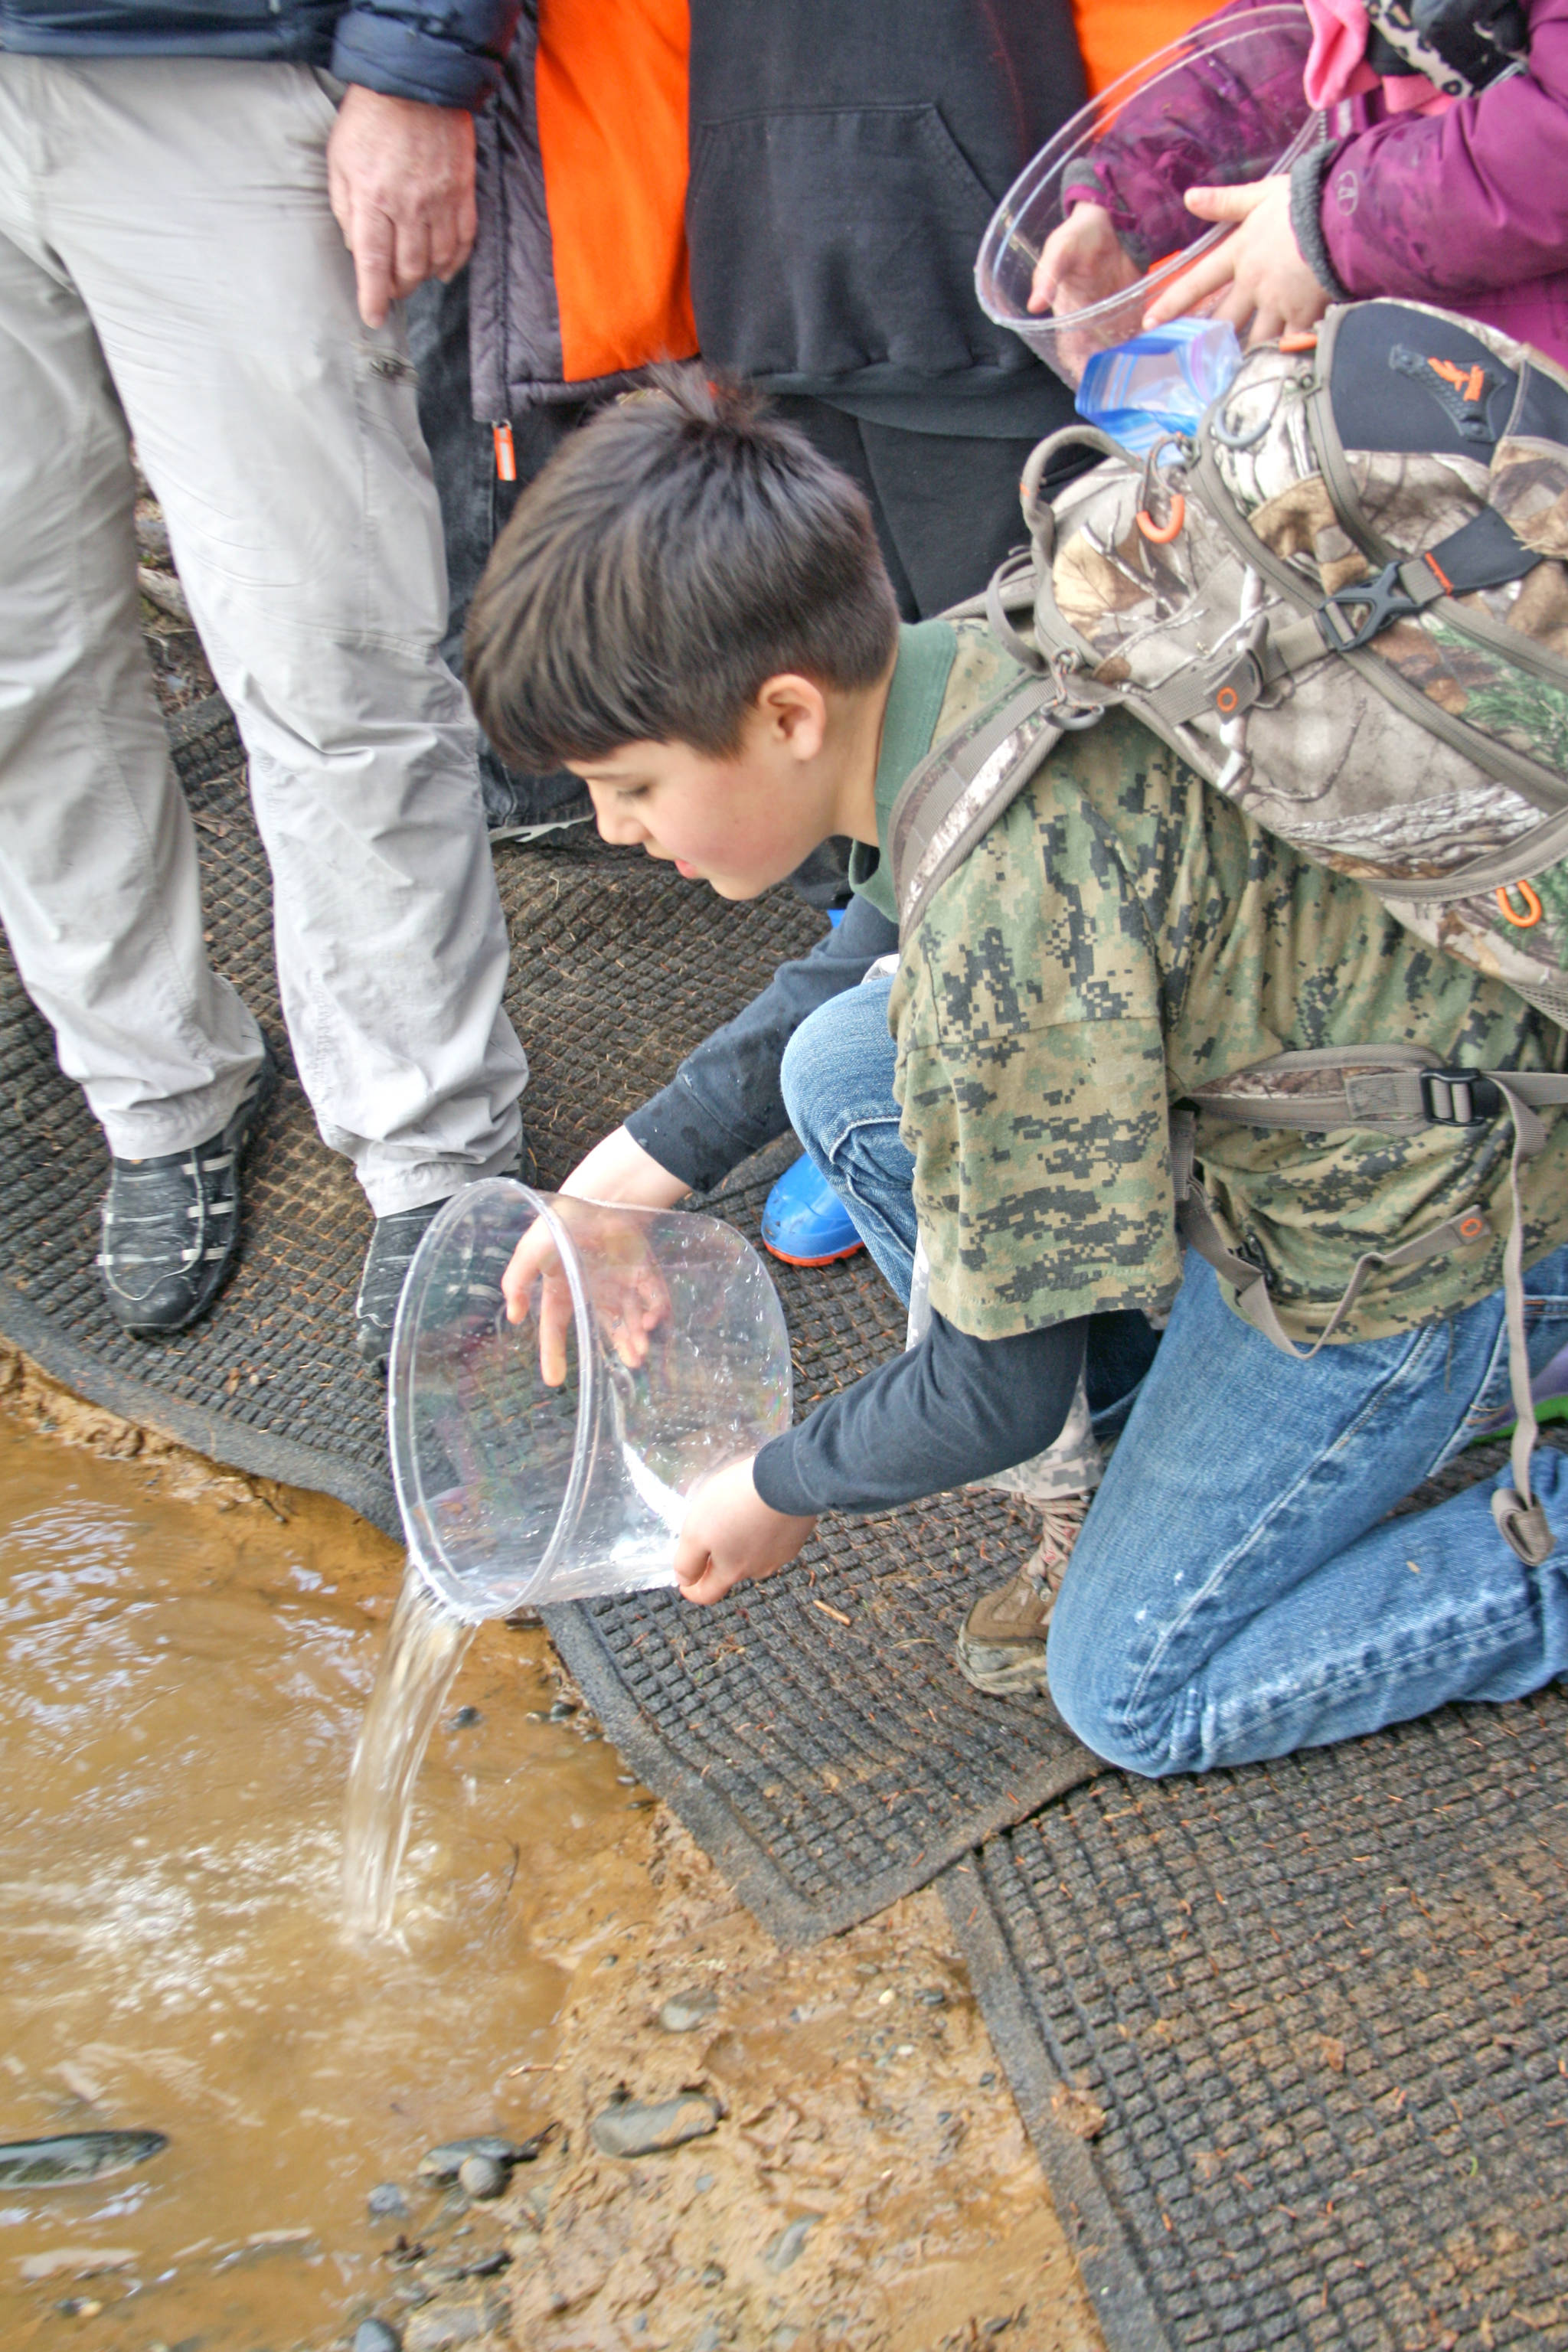 A student releases a rainbow trout into Johnson Lake during the 18th Annual Kenai Peninsula Salmon Celebration in Kasilof. Approximately 950 borough students released 5,000 fish into Johnson Lake as part of an Alaska Department of Fish and Game restocking effort. (Photo by Erin Thompson/Peninsula Clarion)